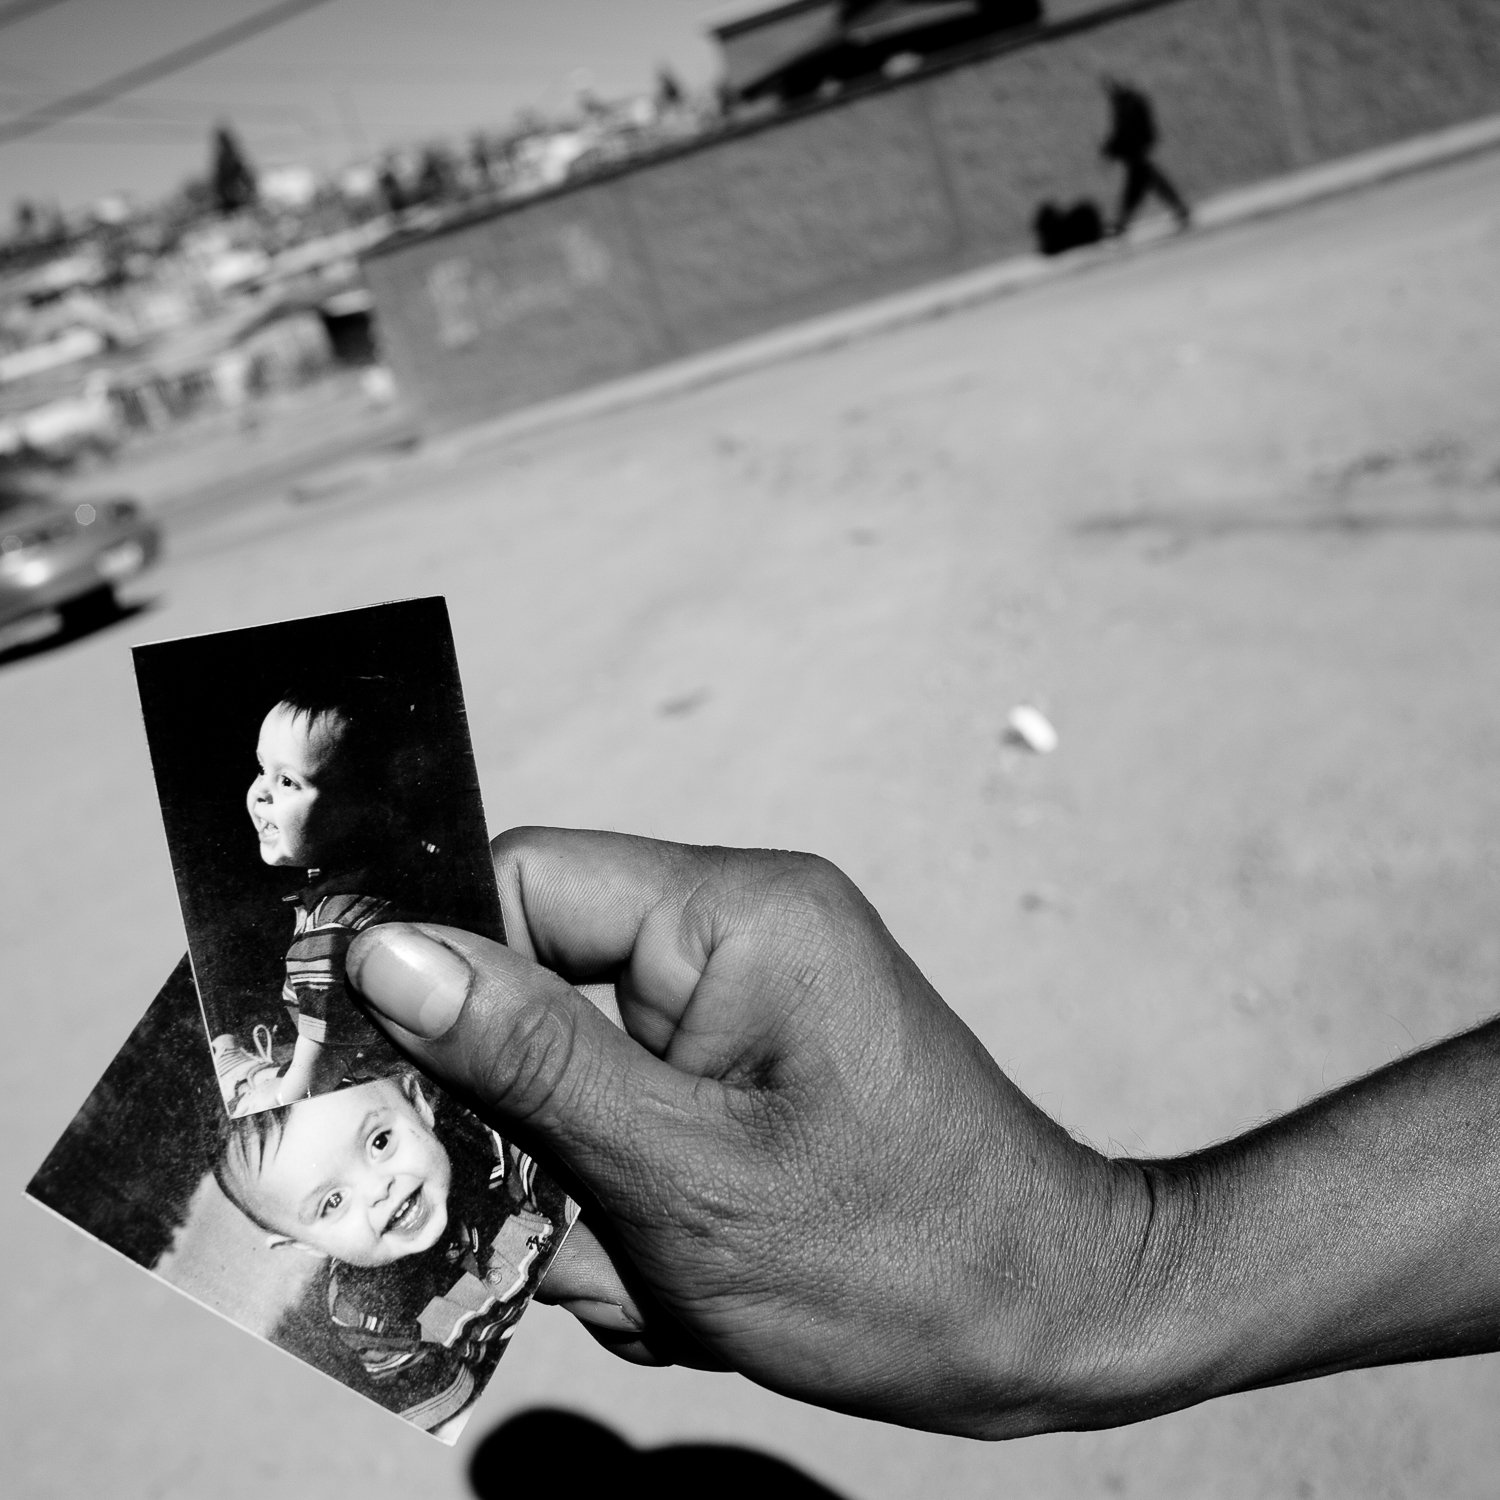  A migrant from Honduras shows photos of his American son in Nogales, Sonora, Mexico. The man lived in Tennessee for years but was unable to begin the citizenship process by marrying his girlfriend because Tennessee does not recognize marriages by un